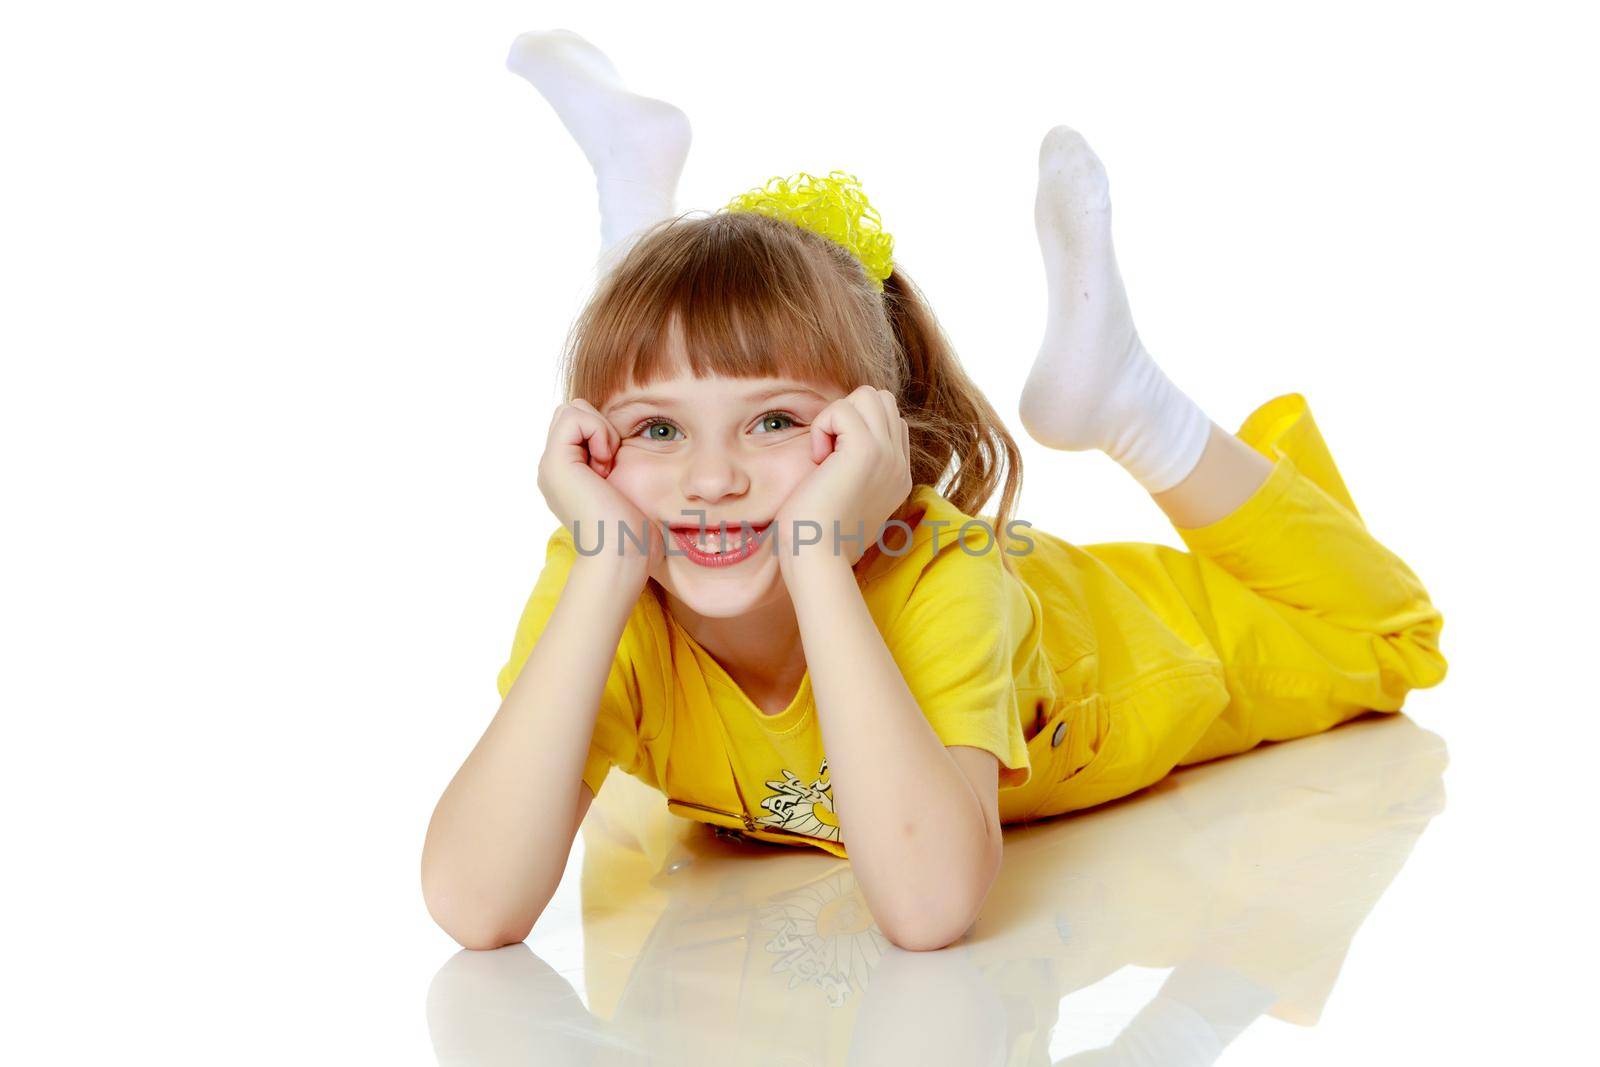 Girl with a short bangs on her head and bright yellow overalls.She crouched down on the white advertising banner.